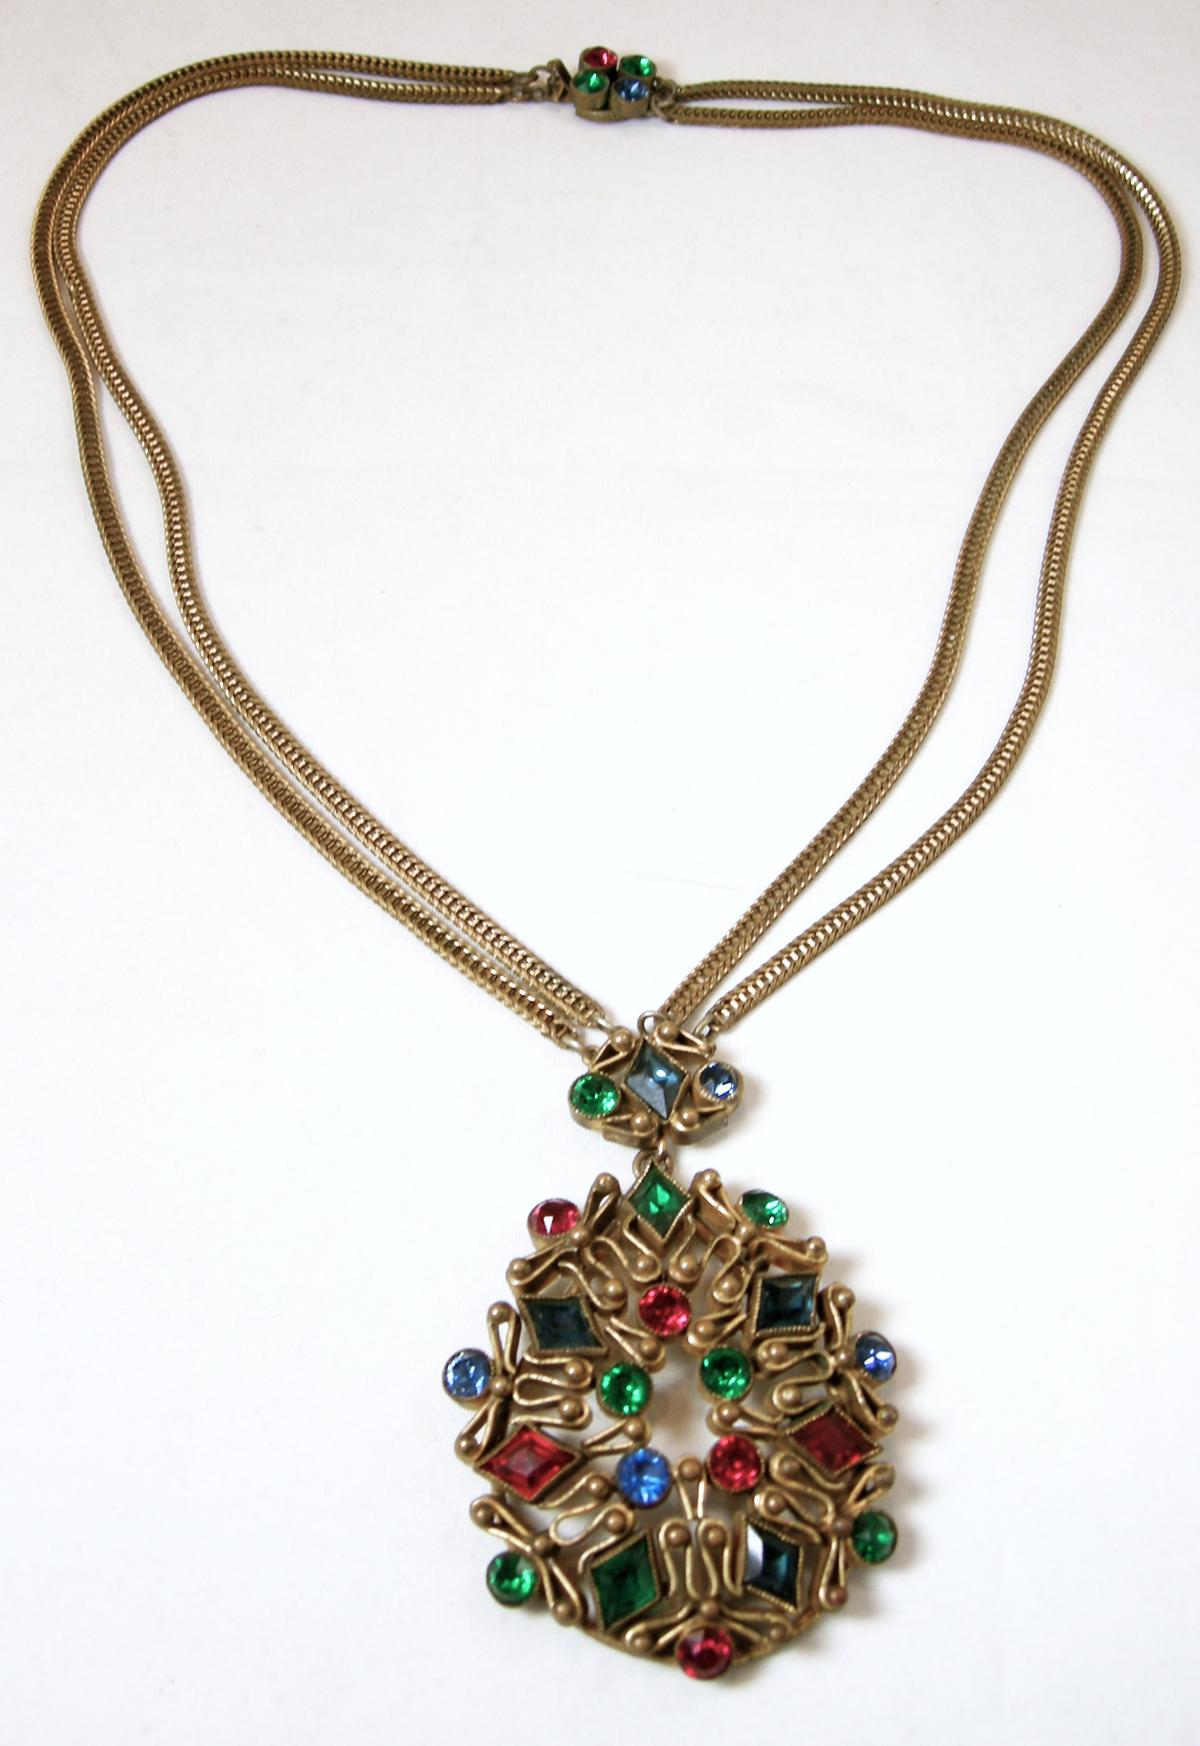 This vintage Czech festoon necklace has the 2 rows of gold tone chain leading down to the red, green and blue crystal drop.  It has a slide in clasp.  The necklace measures 19-1/2” long.  The drop is 2-3/4” x 1-3/4”.  This necklace is in excellent